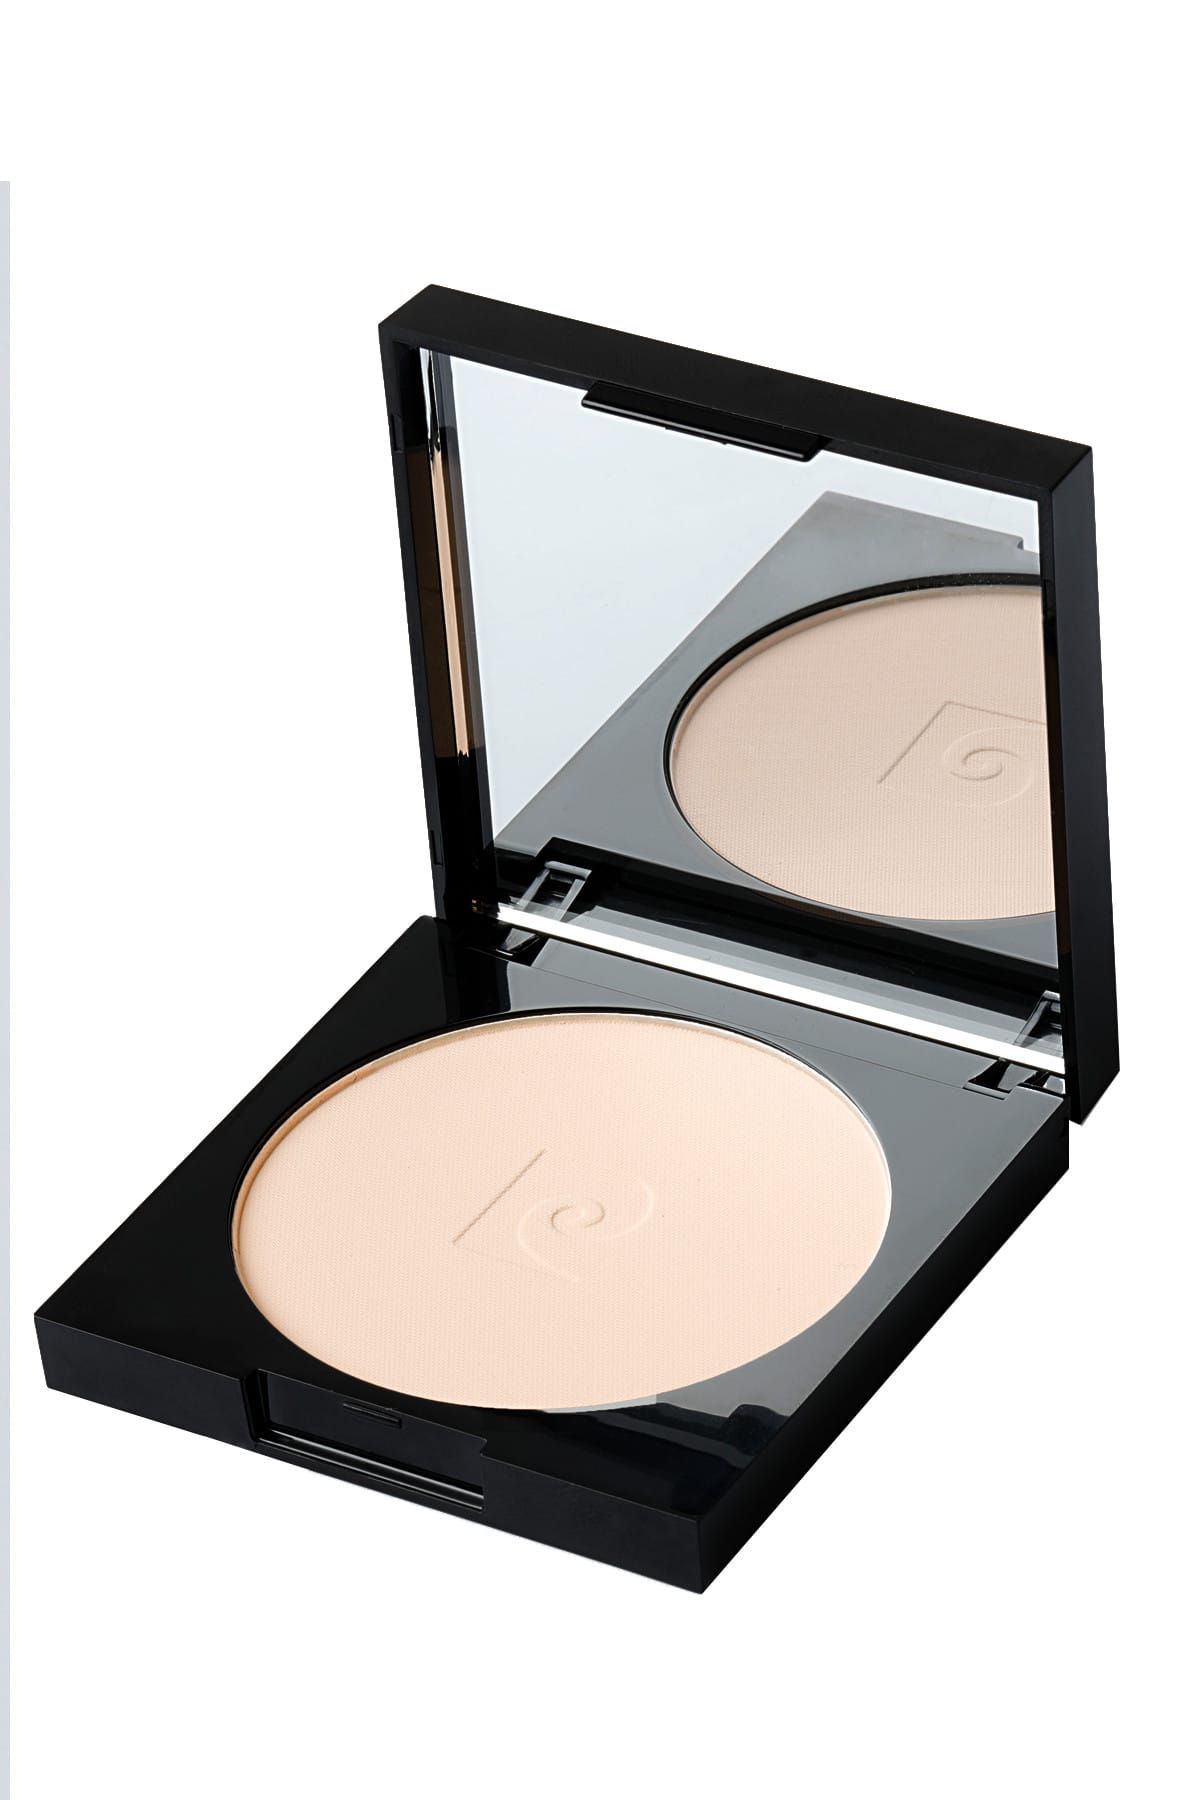 Pierre Cardin Pudra - Porcelain Edition Compact Powder Neutral Ivory 8680570466769